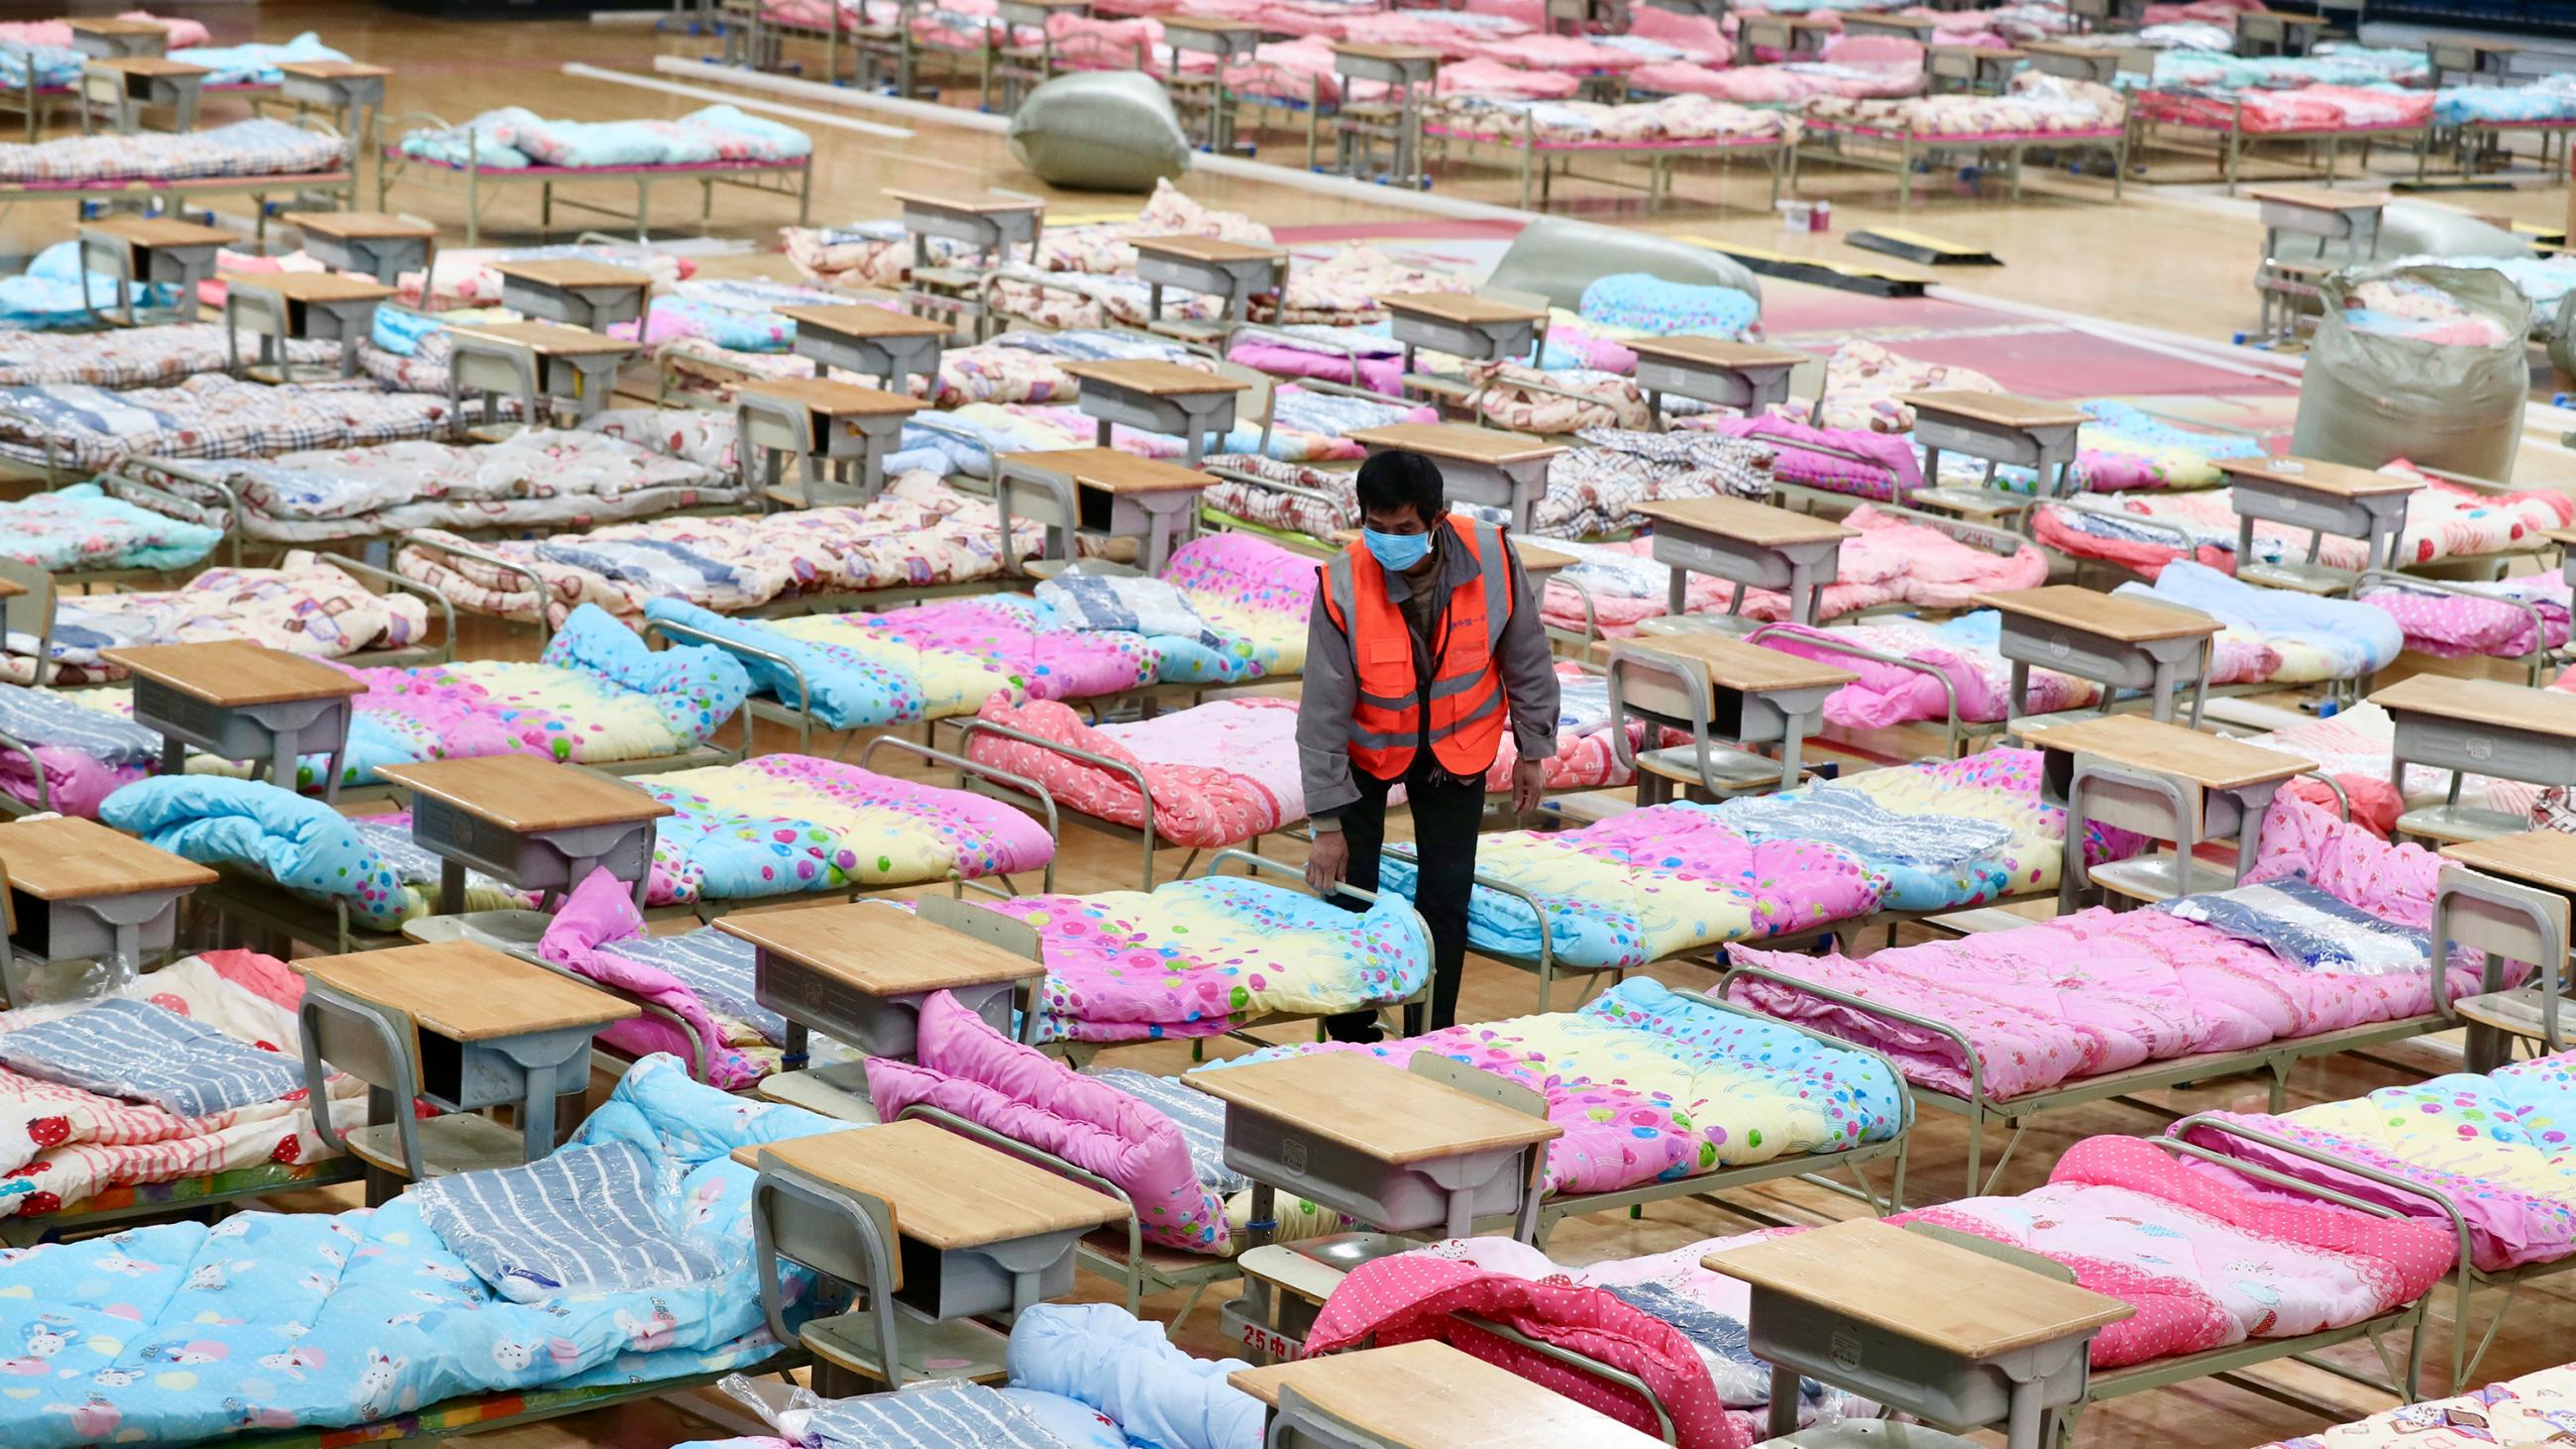 The photo shows a worker adjusting the covers on a bed in a large space filled with hundreds of cot-sized beds covered with white and pink and blue bedding. 